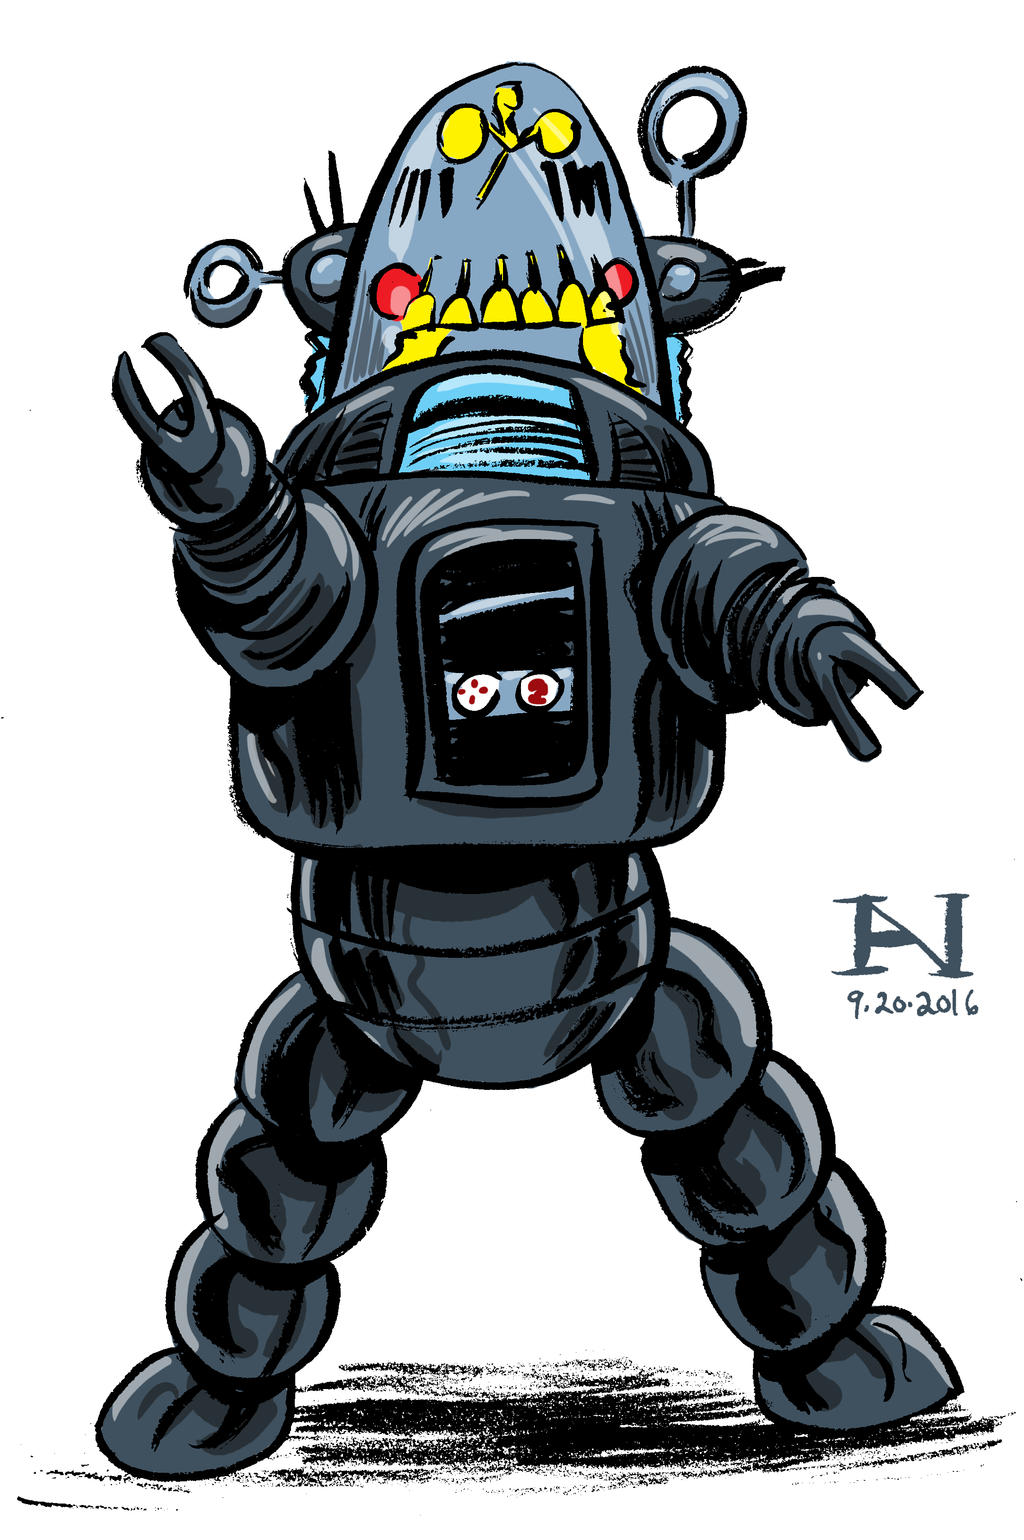 Robby the Robot by IanJMiller on DeviantArt